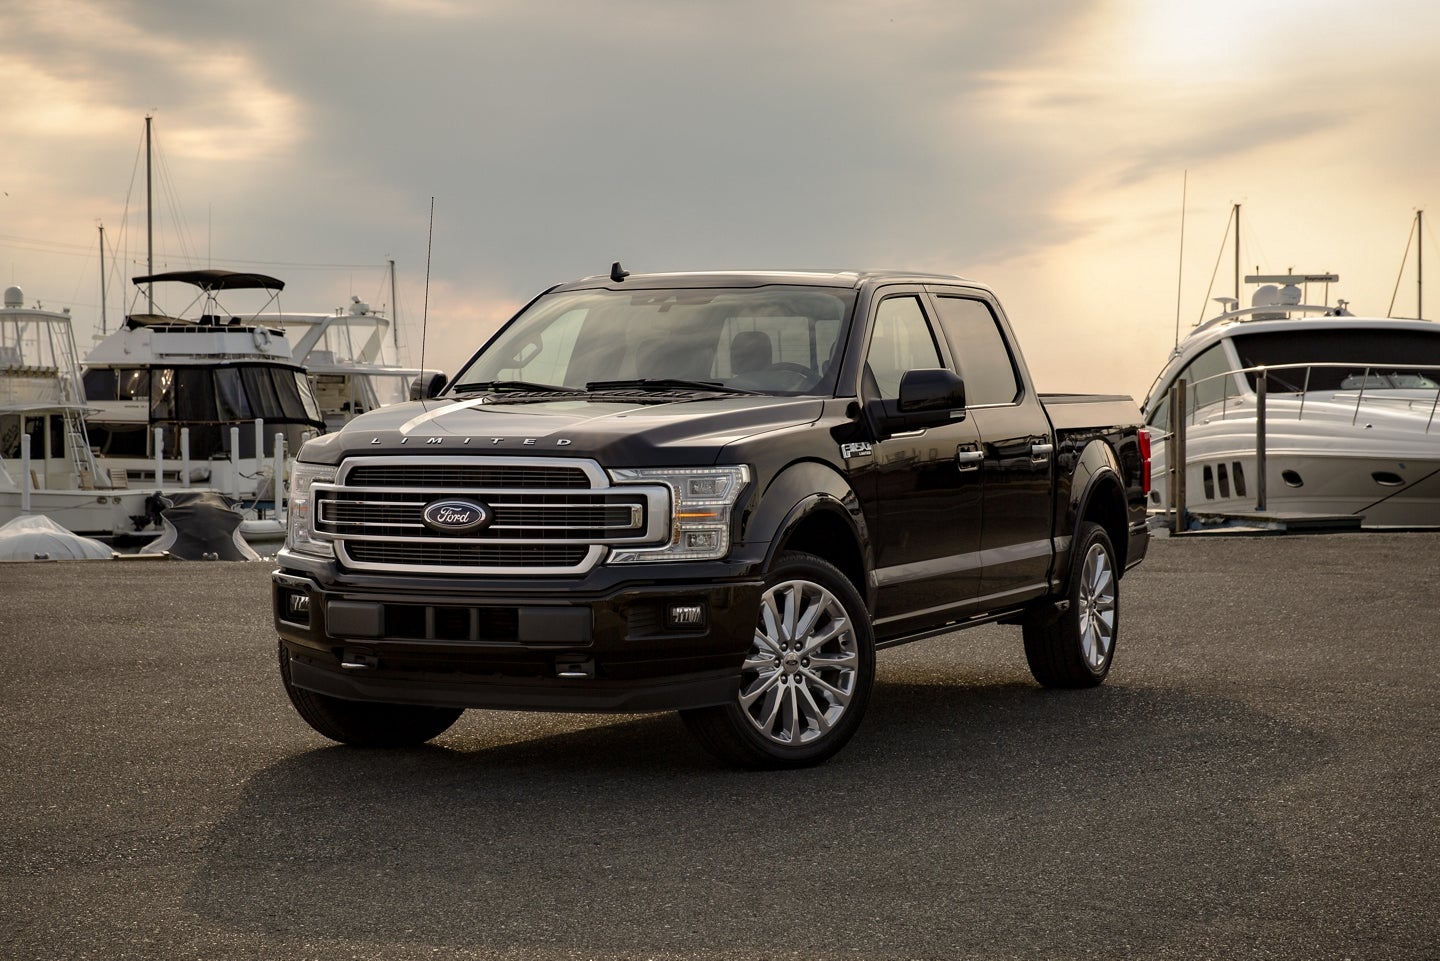 Used Ford F-150 for Sale near Abbeville, AL